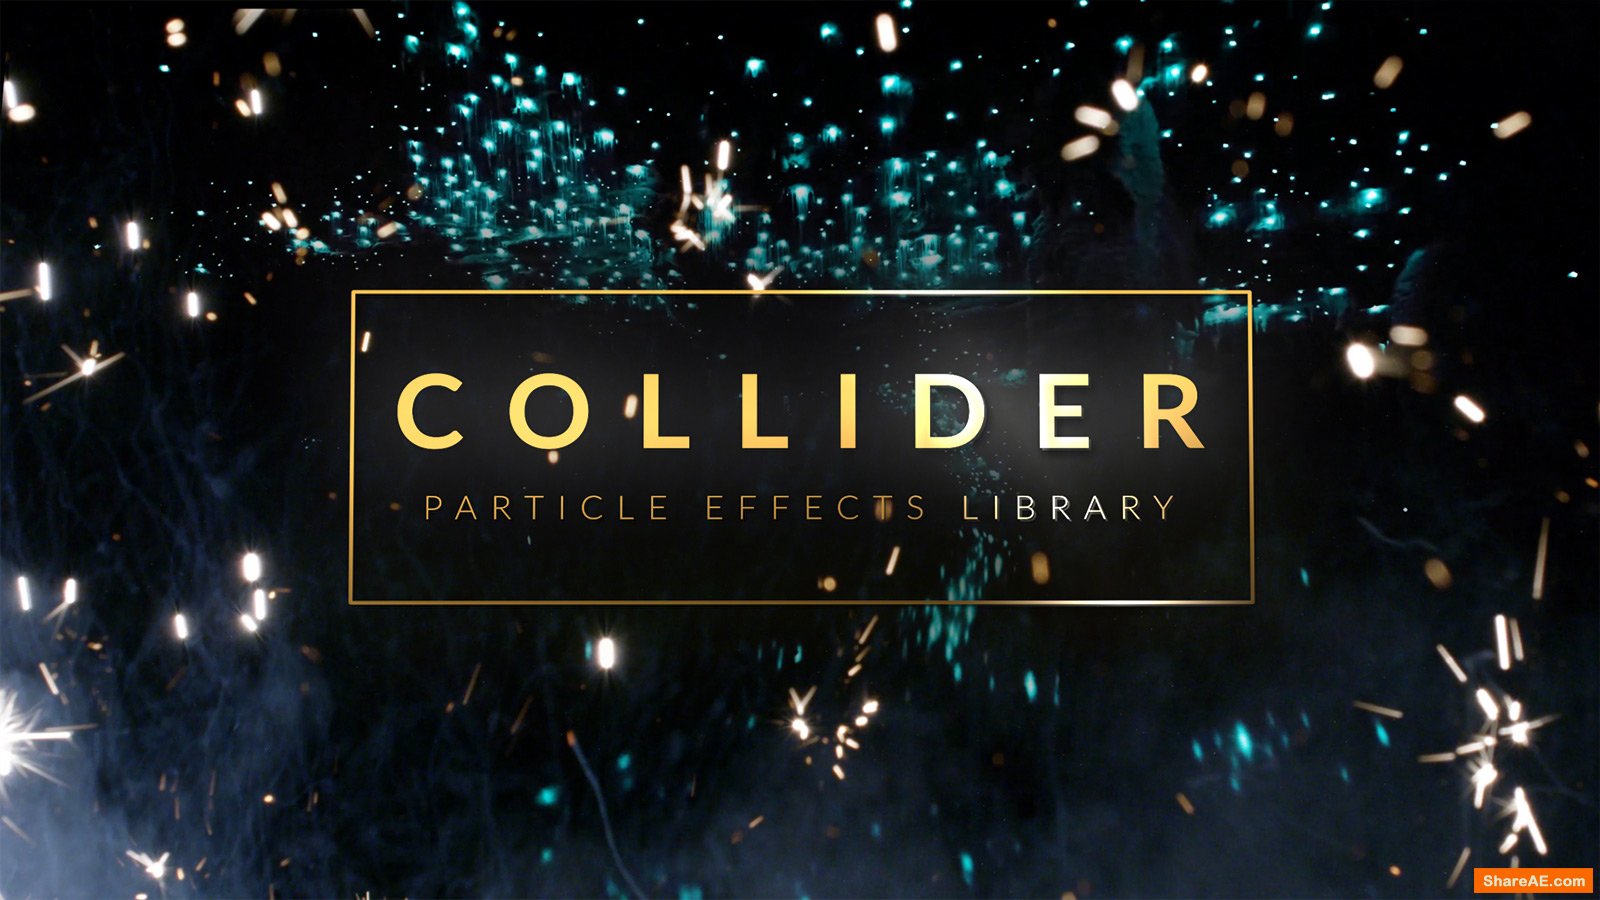 Collider: 150+ Particle Effects for Film and Video Projects (RocketStock)